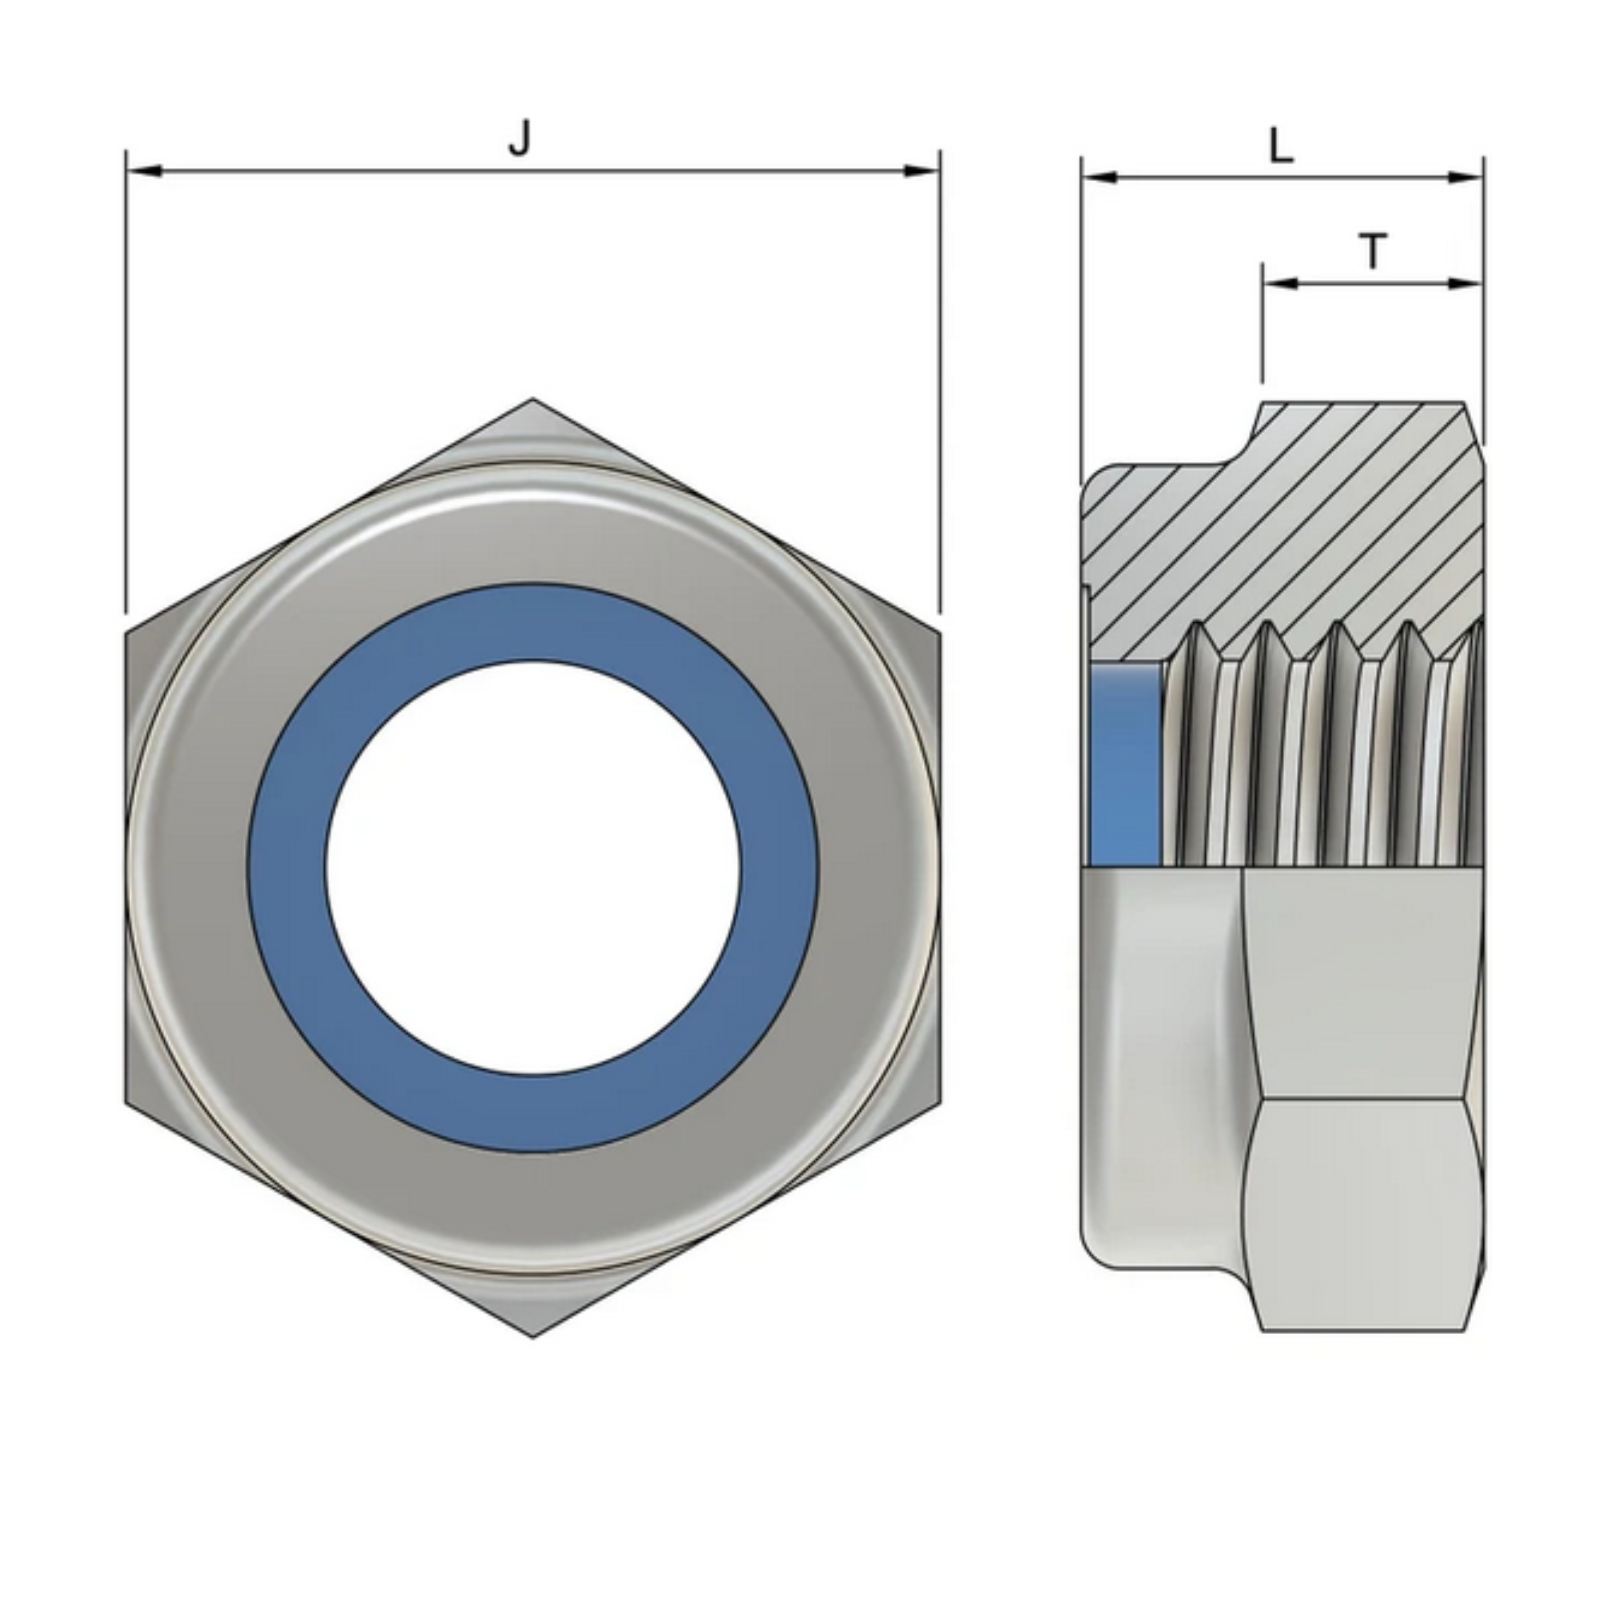 M8 Hexagon Nylon Locking Nuts (DIN 985) - Stainless Steel (A2)